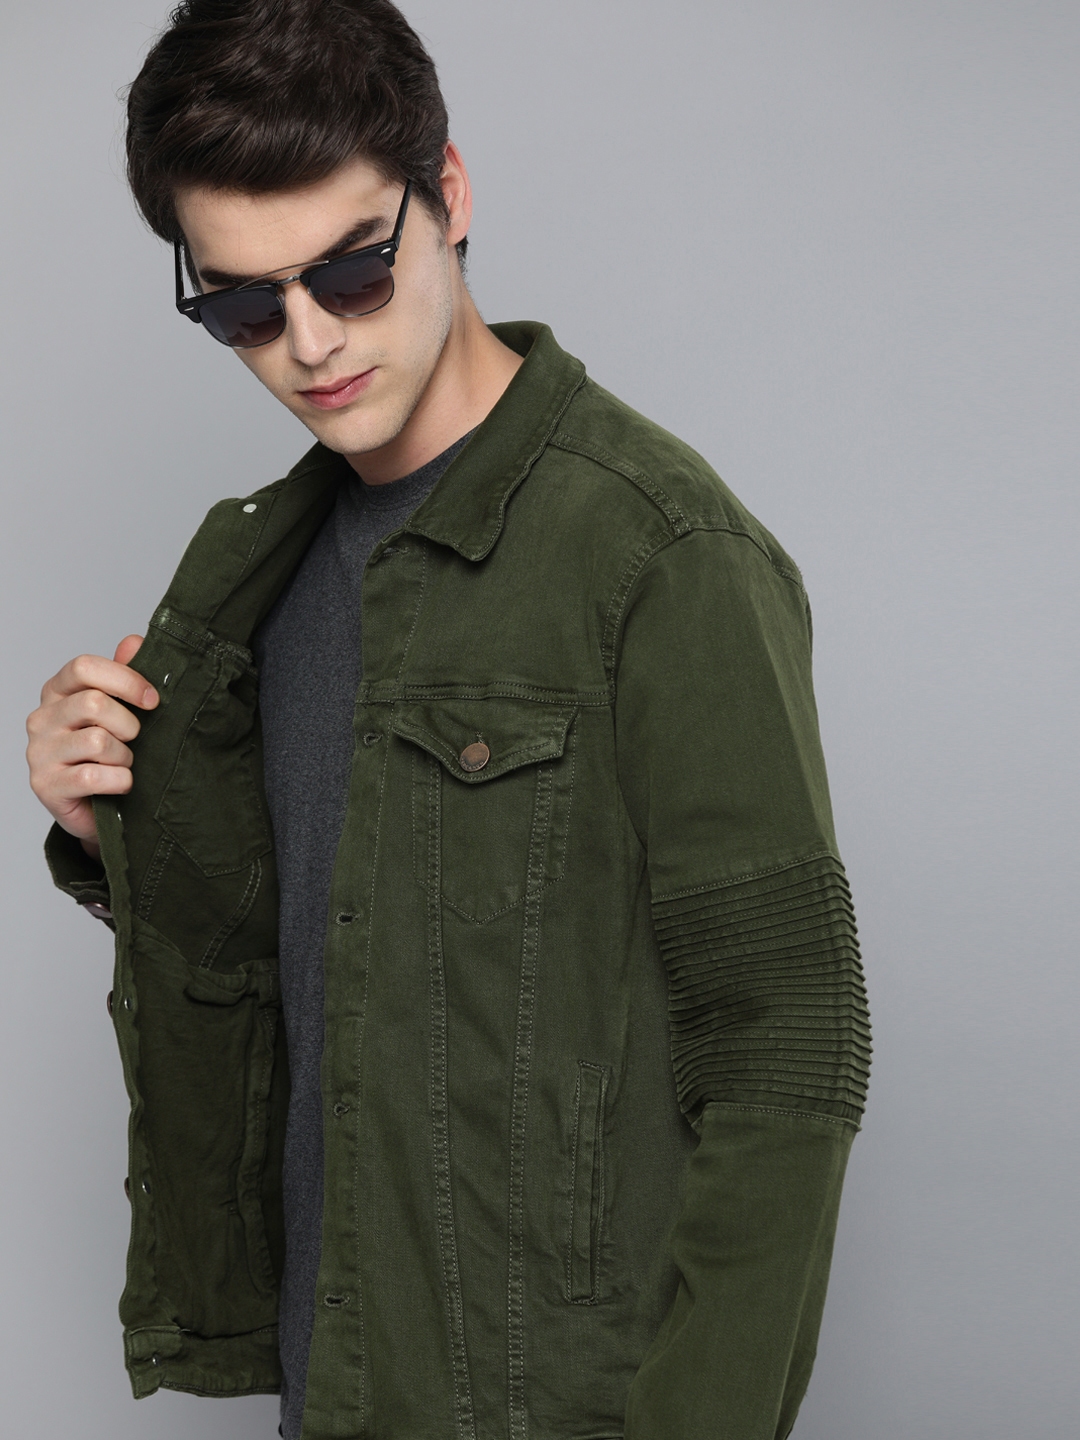 Experience more than 169 olive green denim jacket best